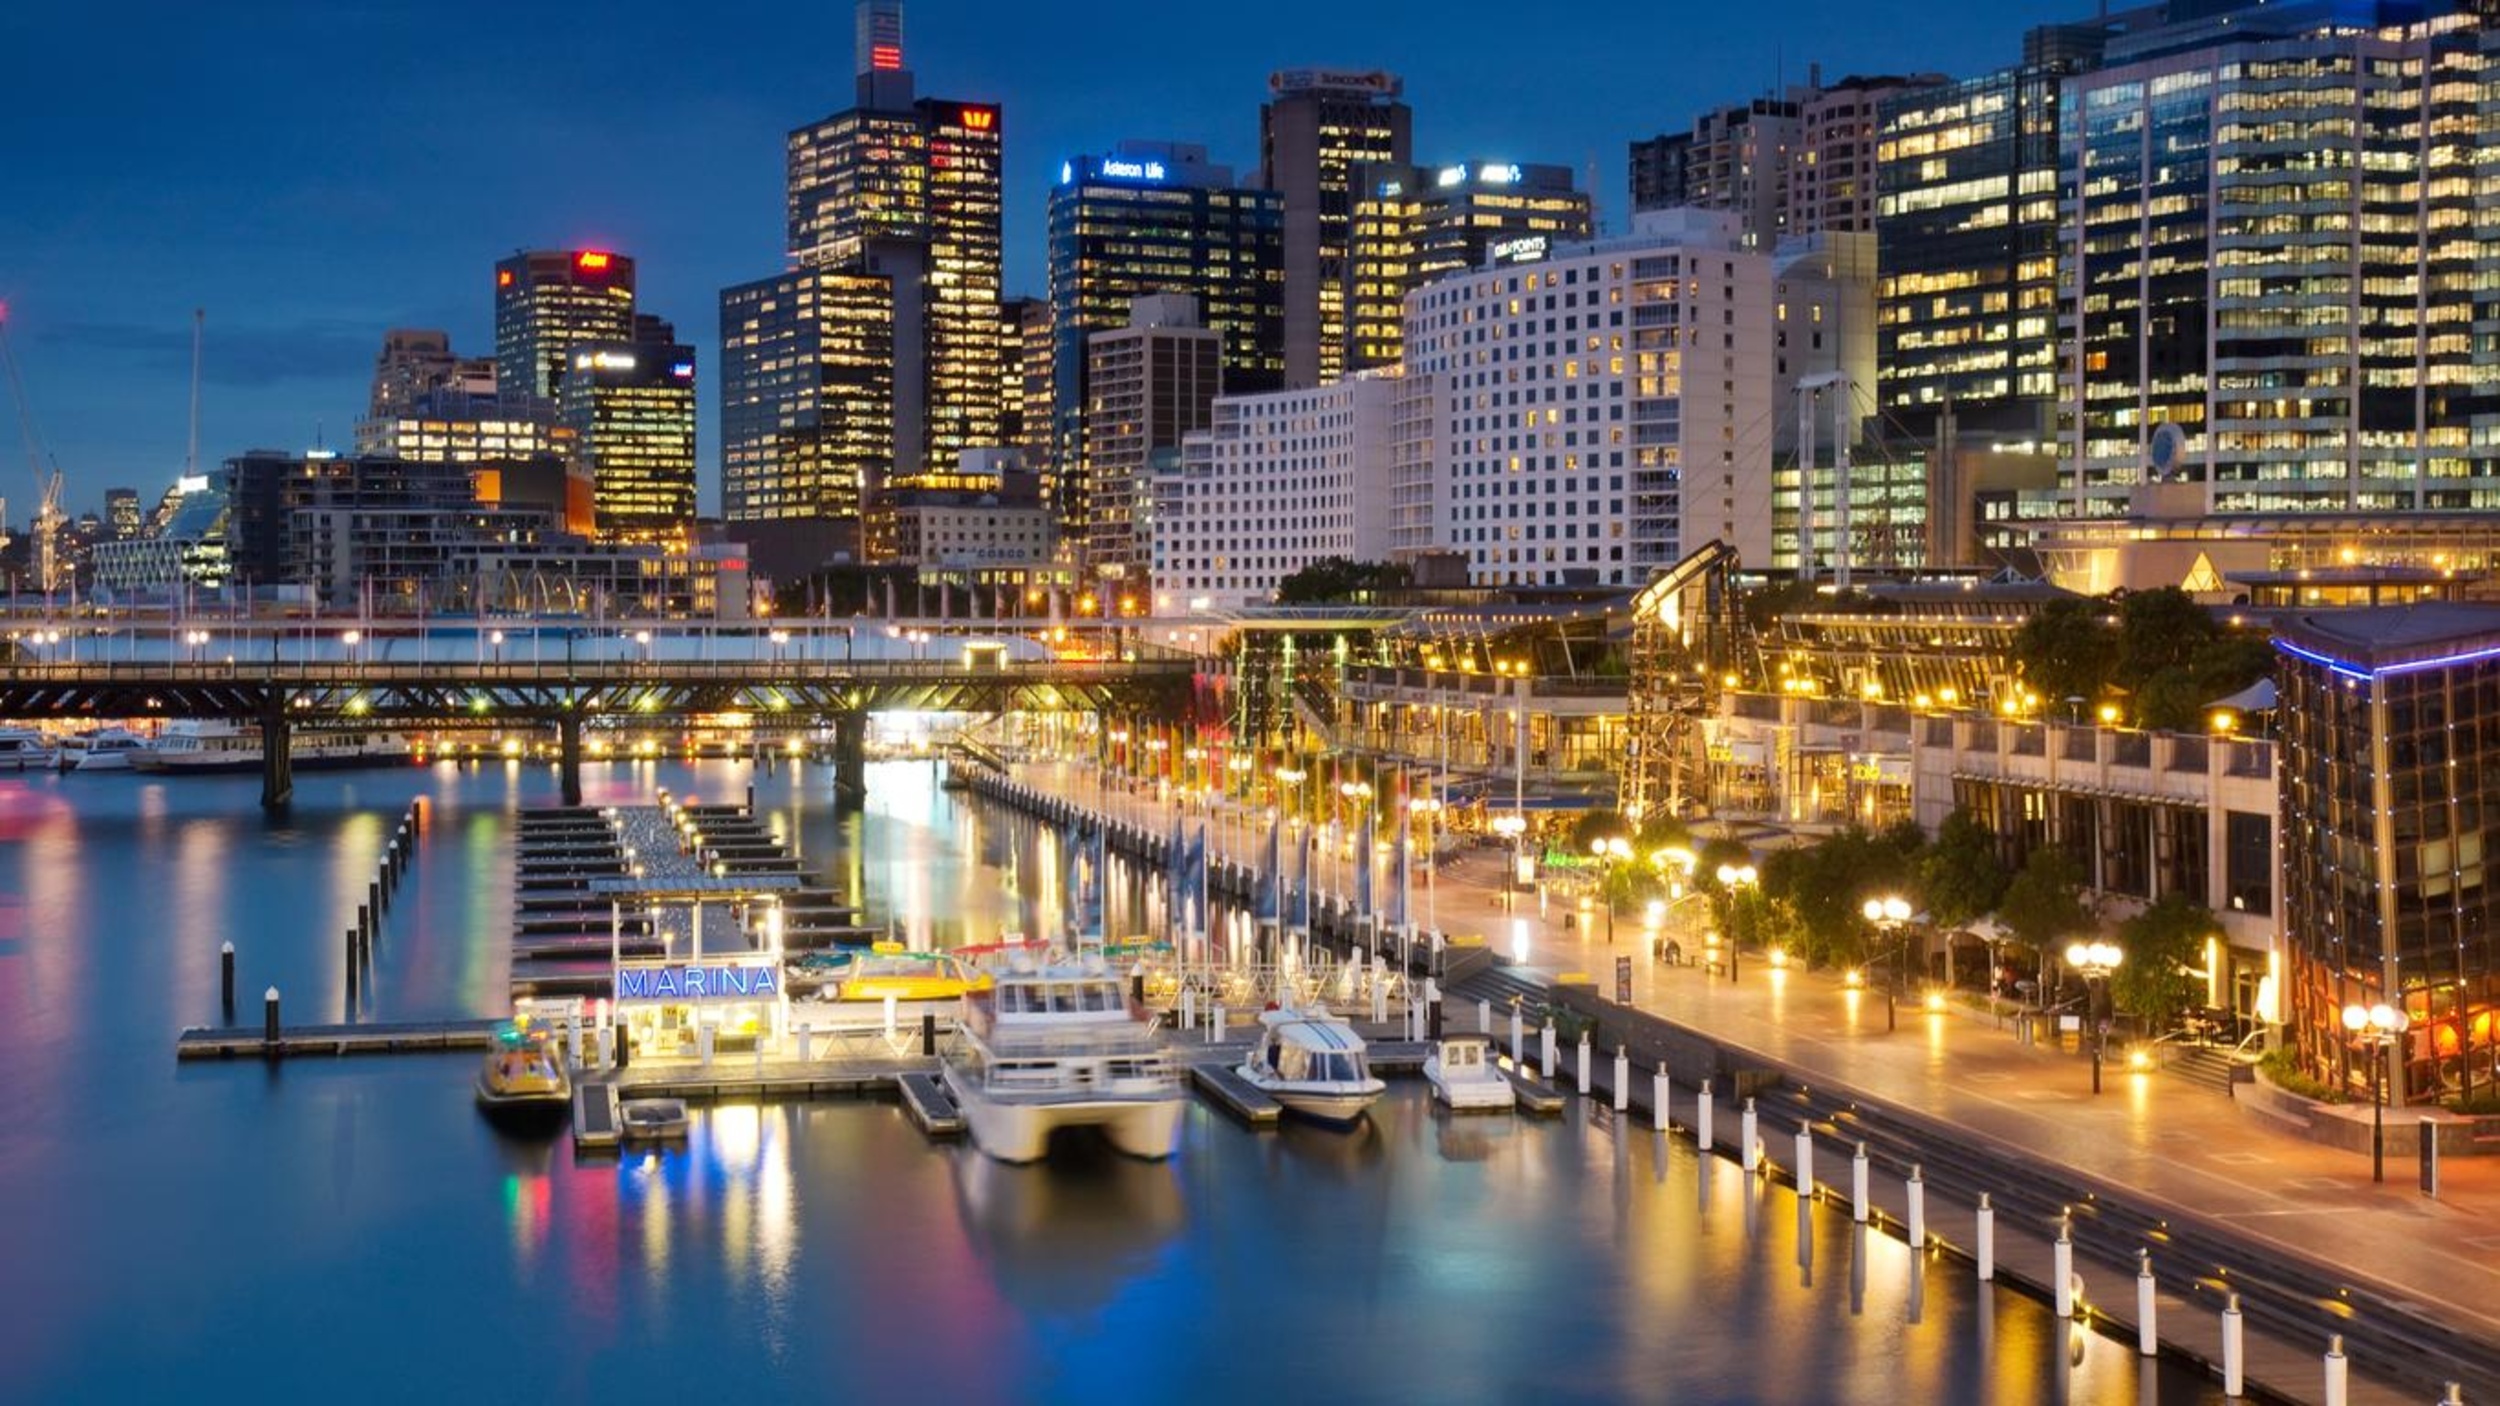 <p>The harbor near the Opera House is where the city comes to life. Tourists pack the streets, locals pack the pubs and there always seems to be something happening, from concerts to events. This is a place you can just stroll through throughout the day.</p><p><a href='https://www.msn.com/en-us/community/channel/vid-cj9pqbr0vn9in2b6ddcd8sfgpfq6x6utp44fssrv6mc2gtybw0us'>Follow us on MSN to see more of our exclusive lifestyle content.</a></p>